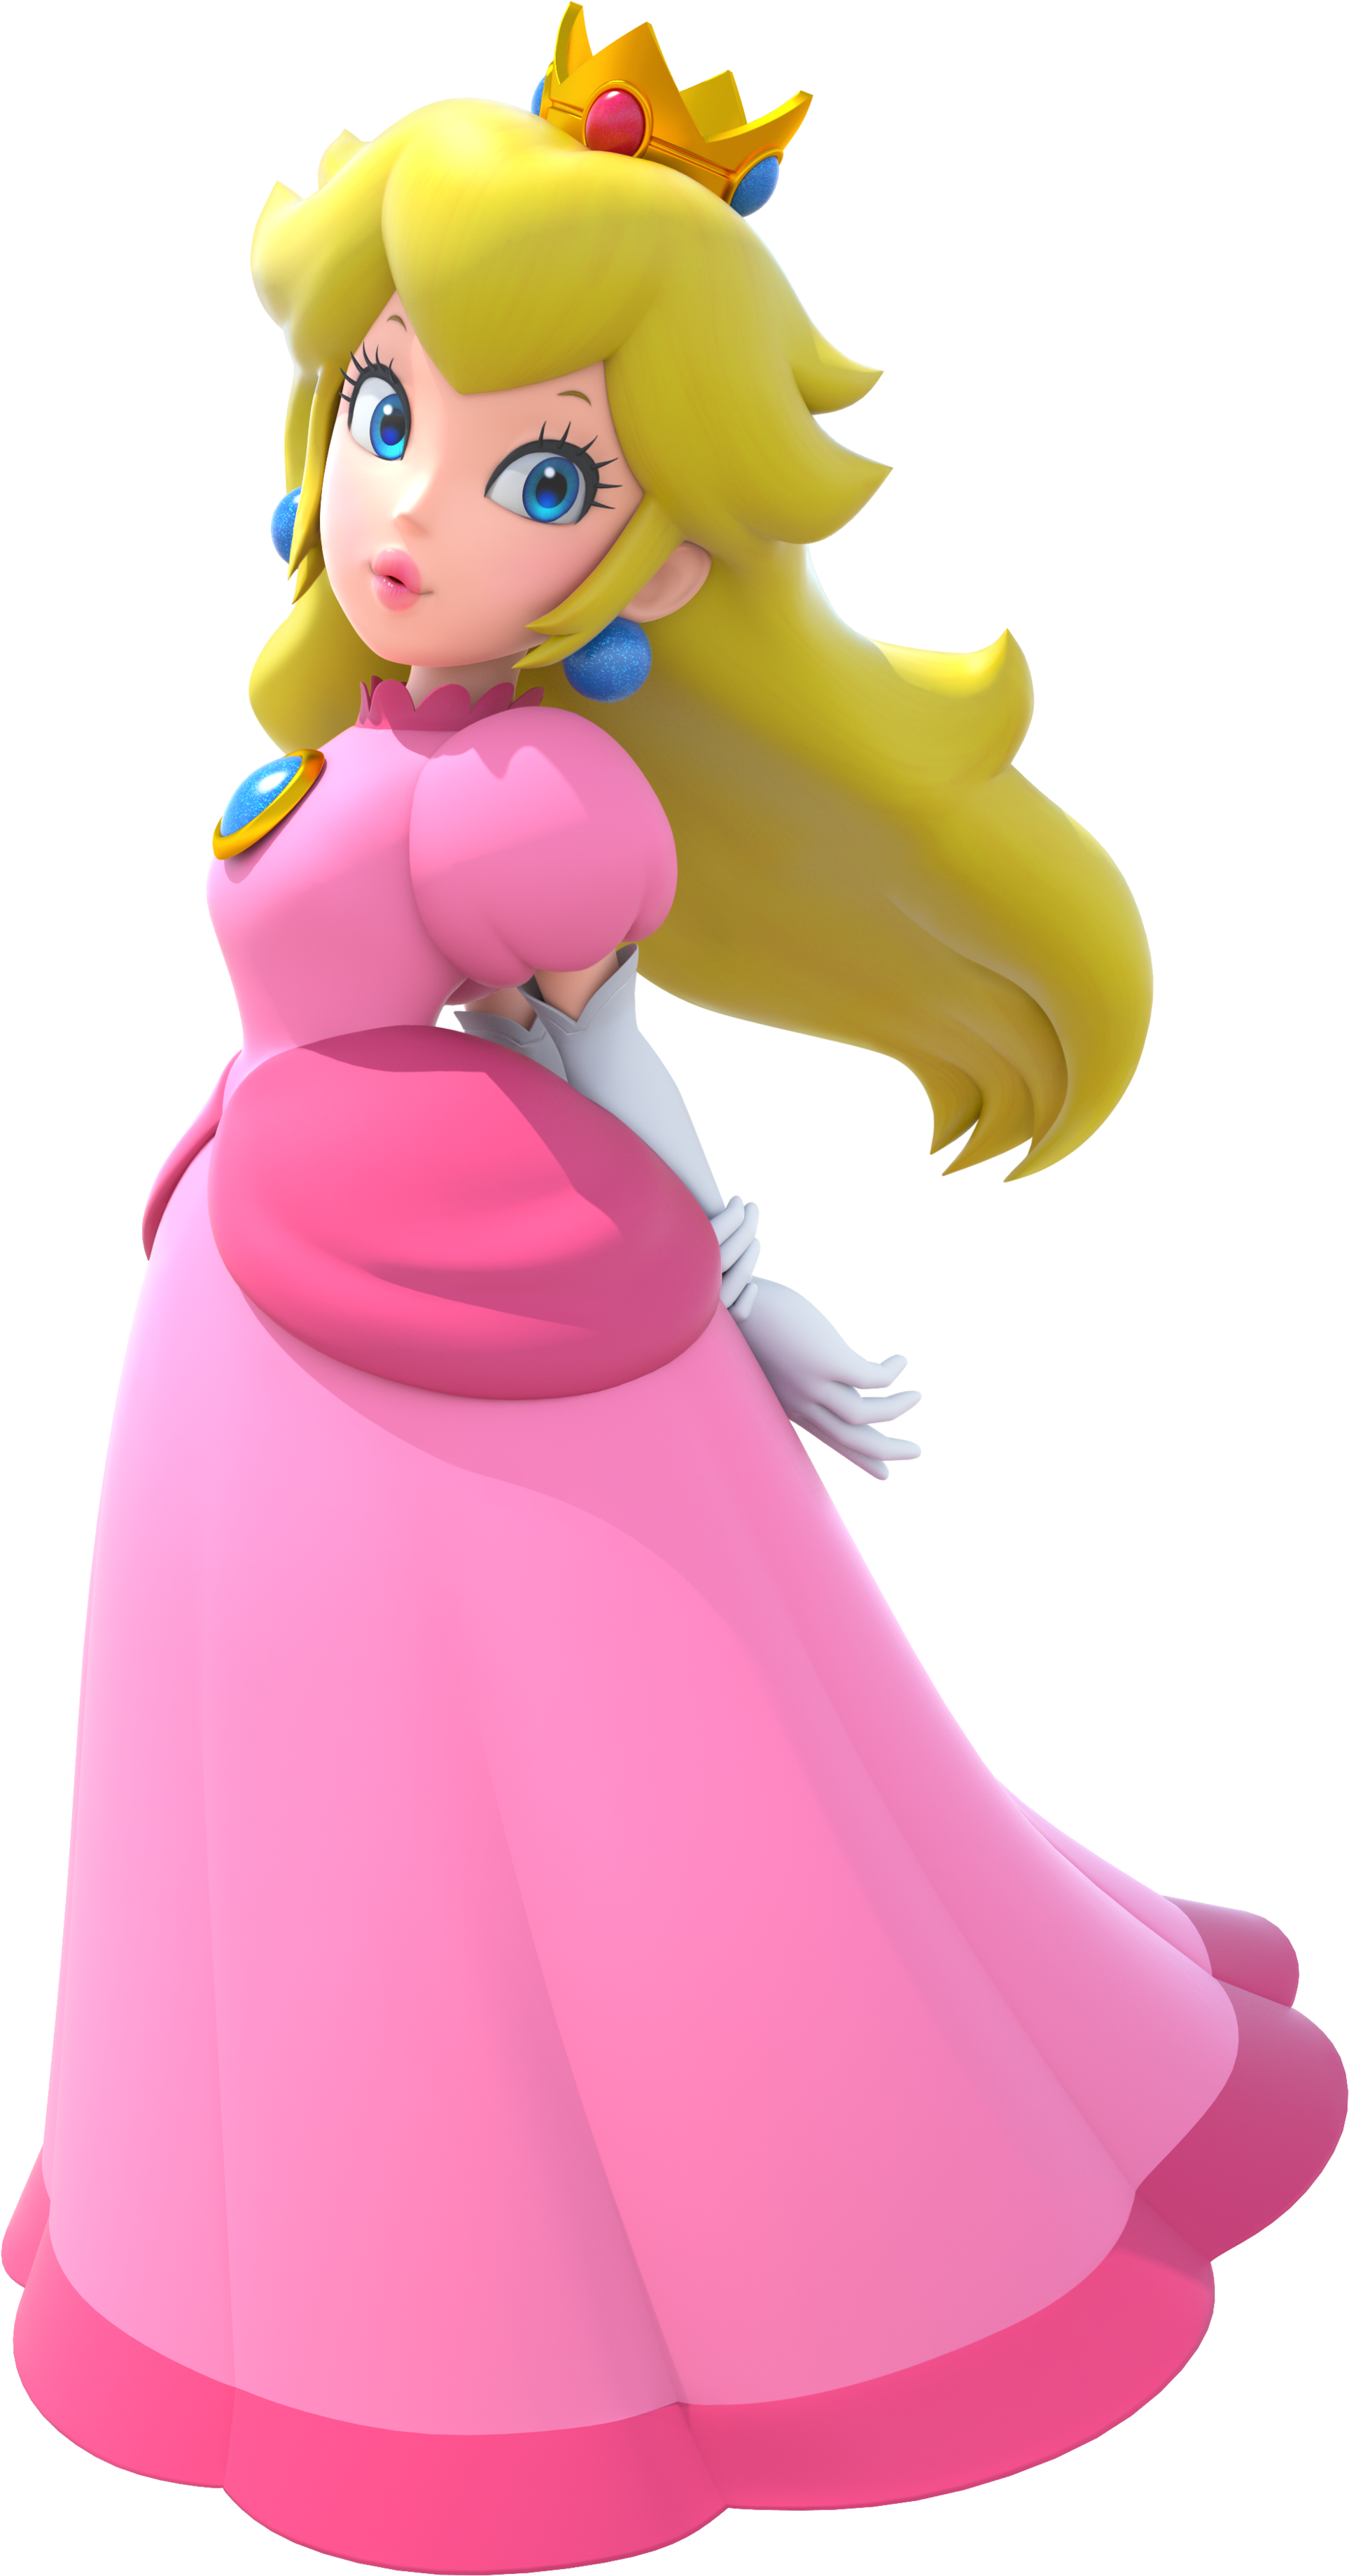 nintendo, apple, castle Png images gallery